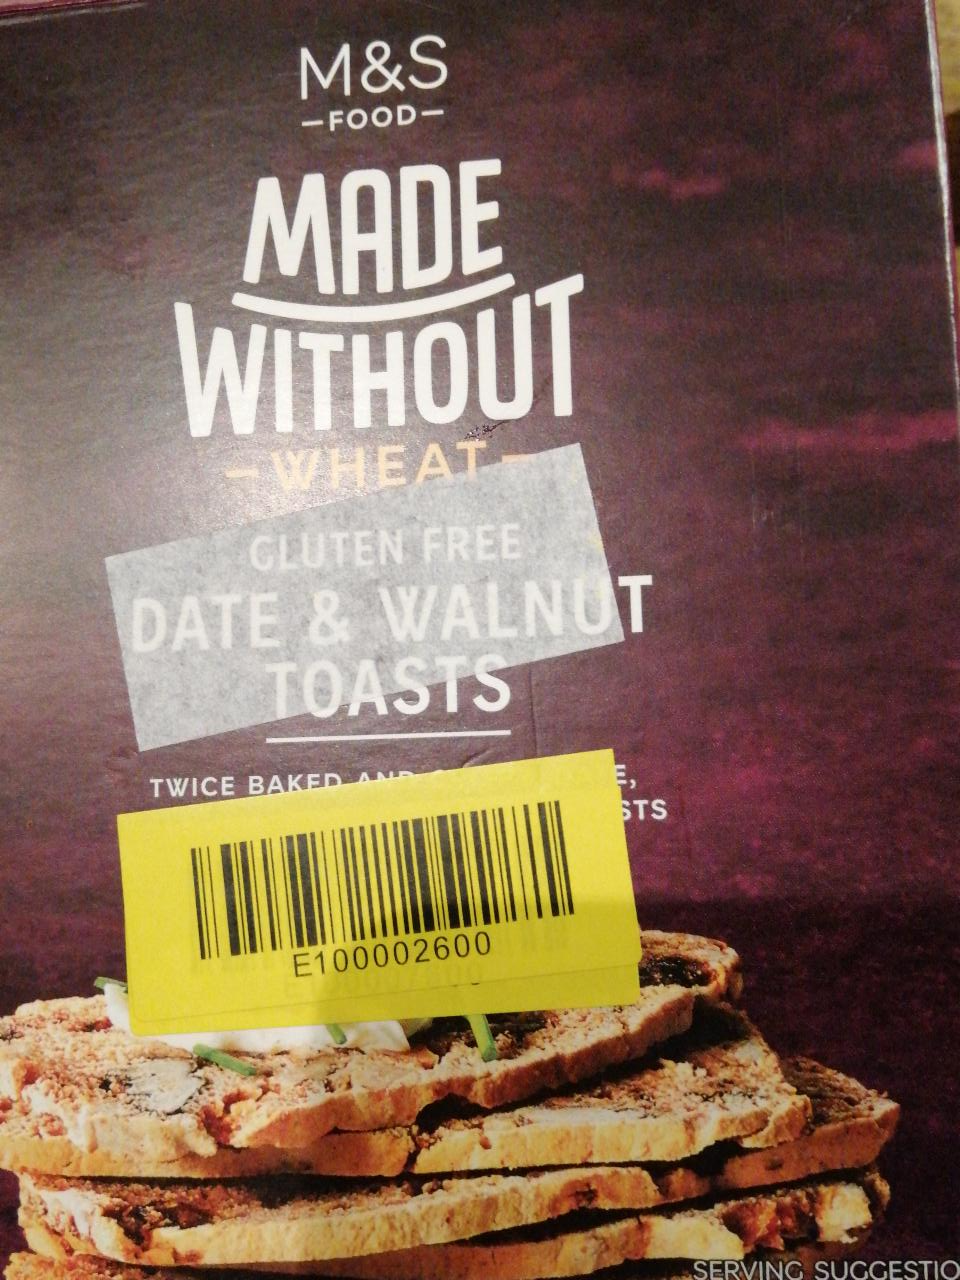 Photo - Made Without Date & Walnut Toasts Gluten free M&S Food